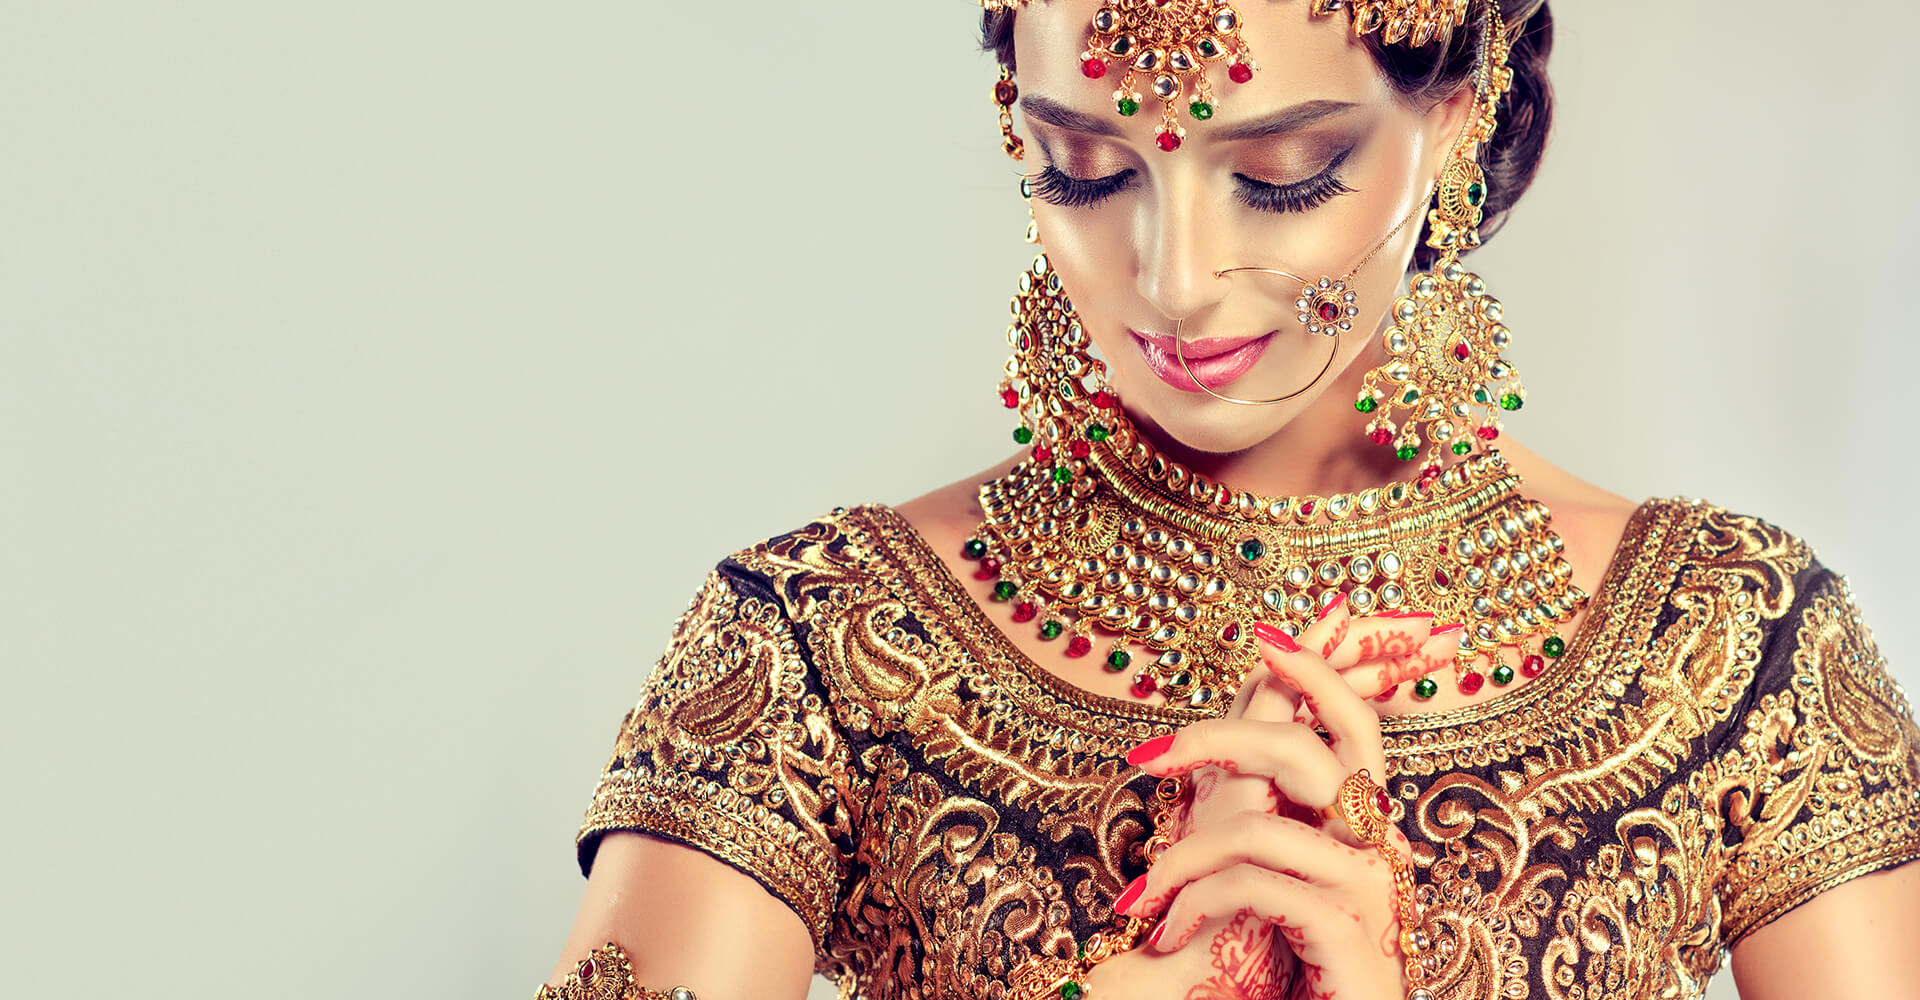 gorgeous indian bride in traditional wedding outfit with colorful jewerly